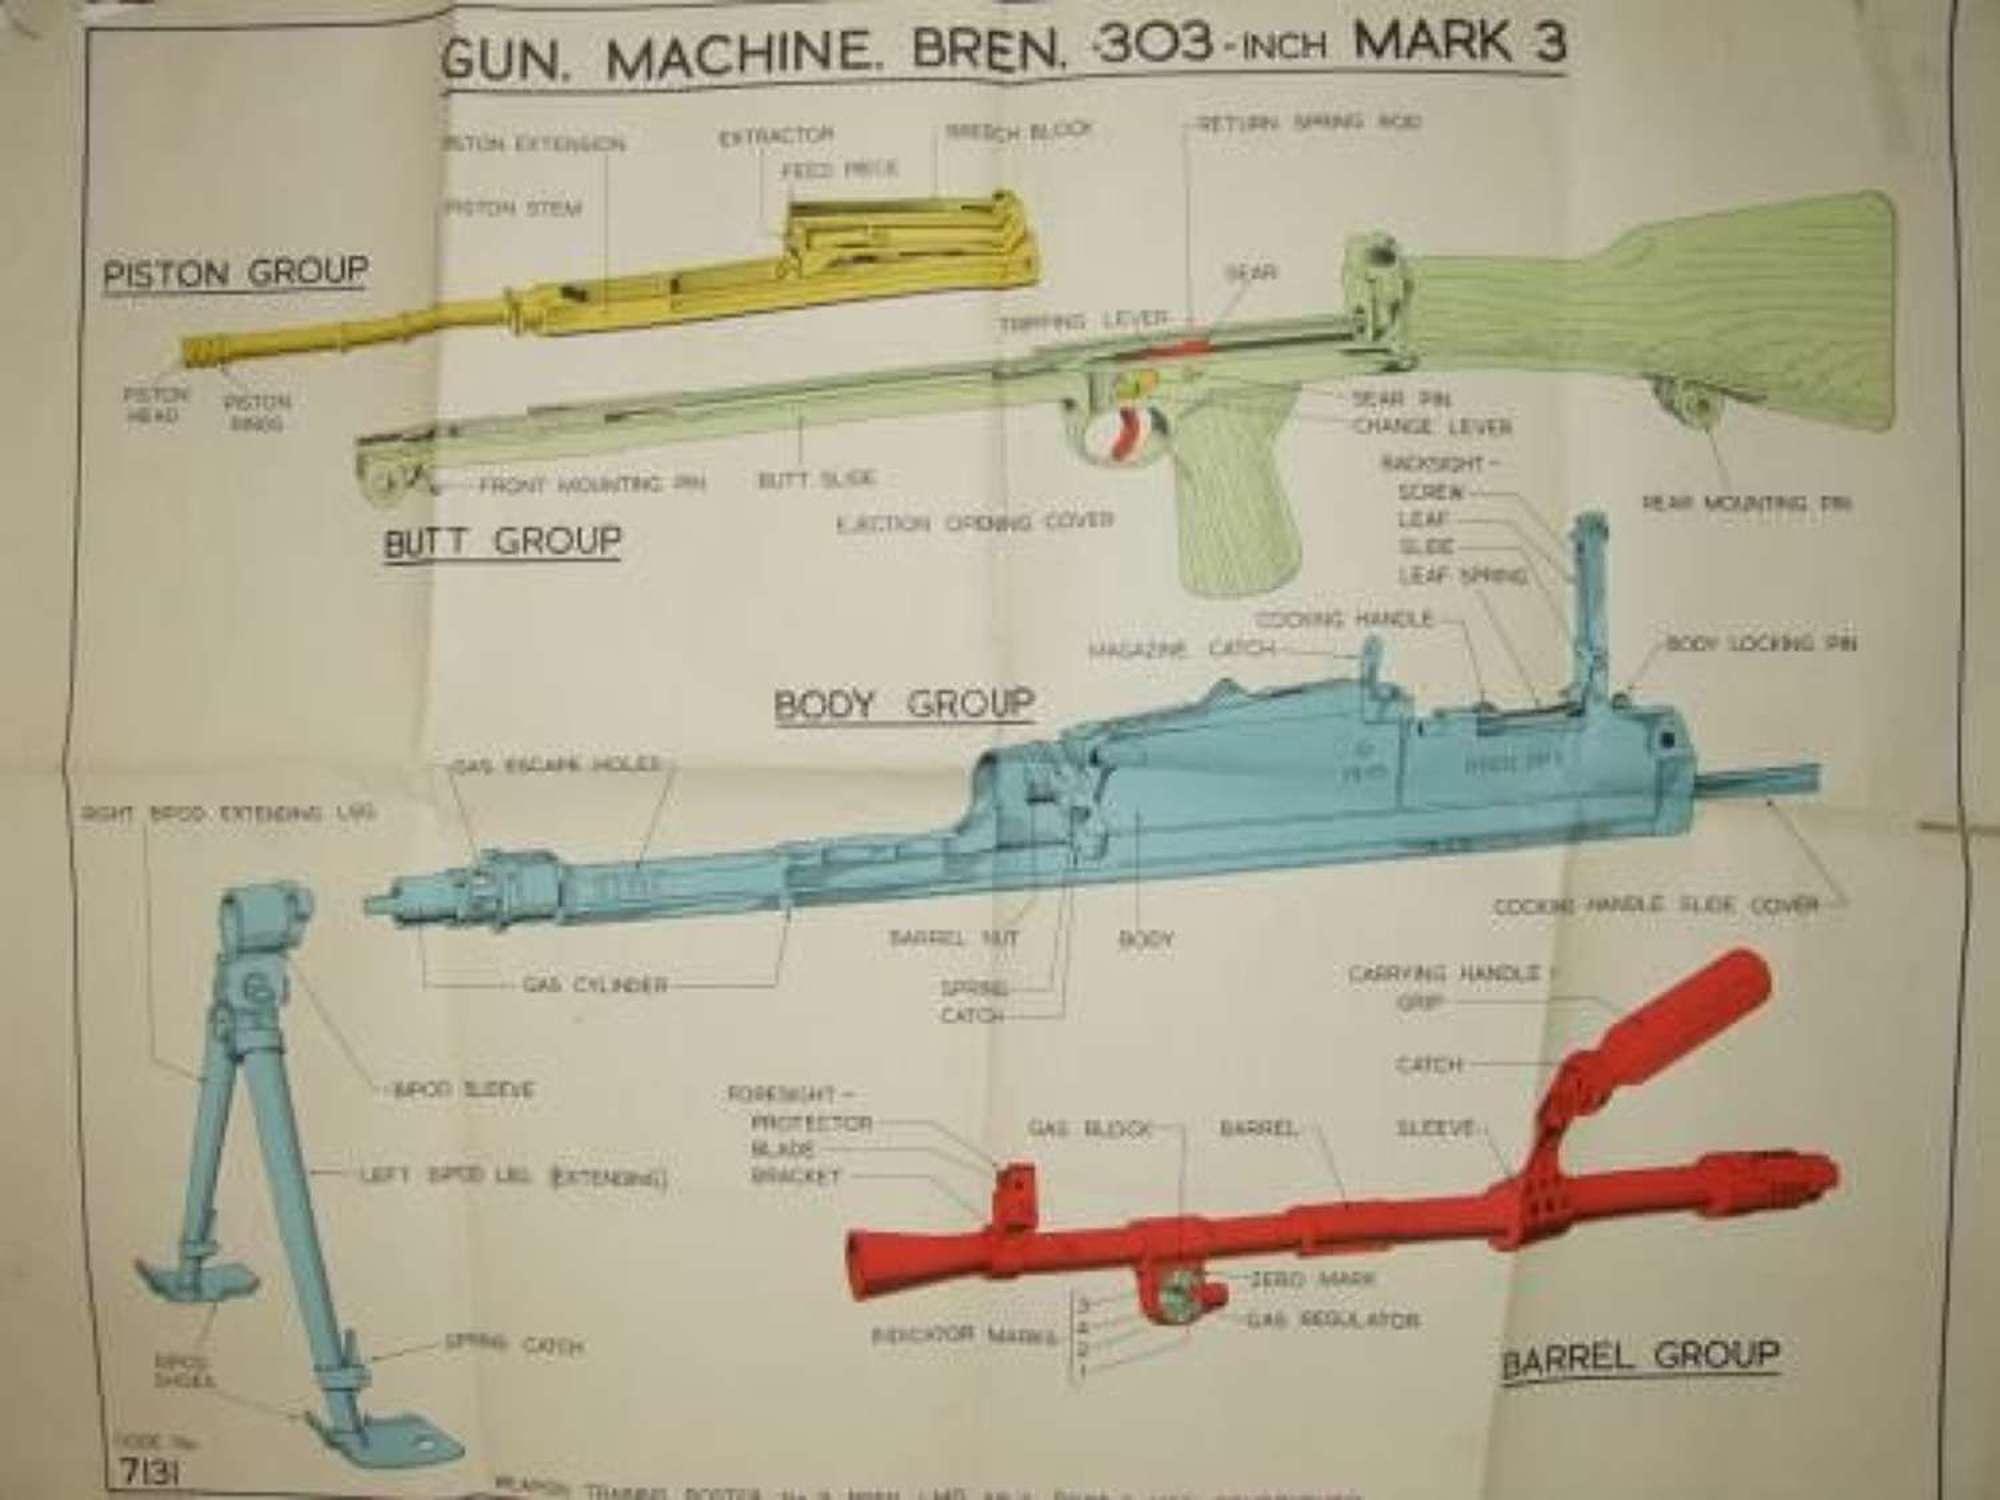 Weapon Training Poster No.2 Bren LMG Mk3. Part 2 Main Components